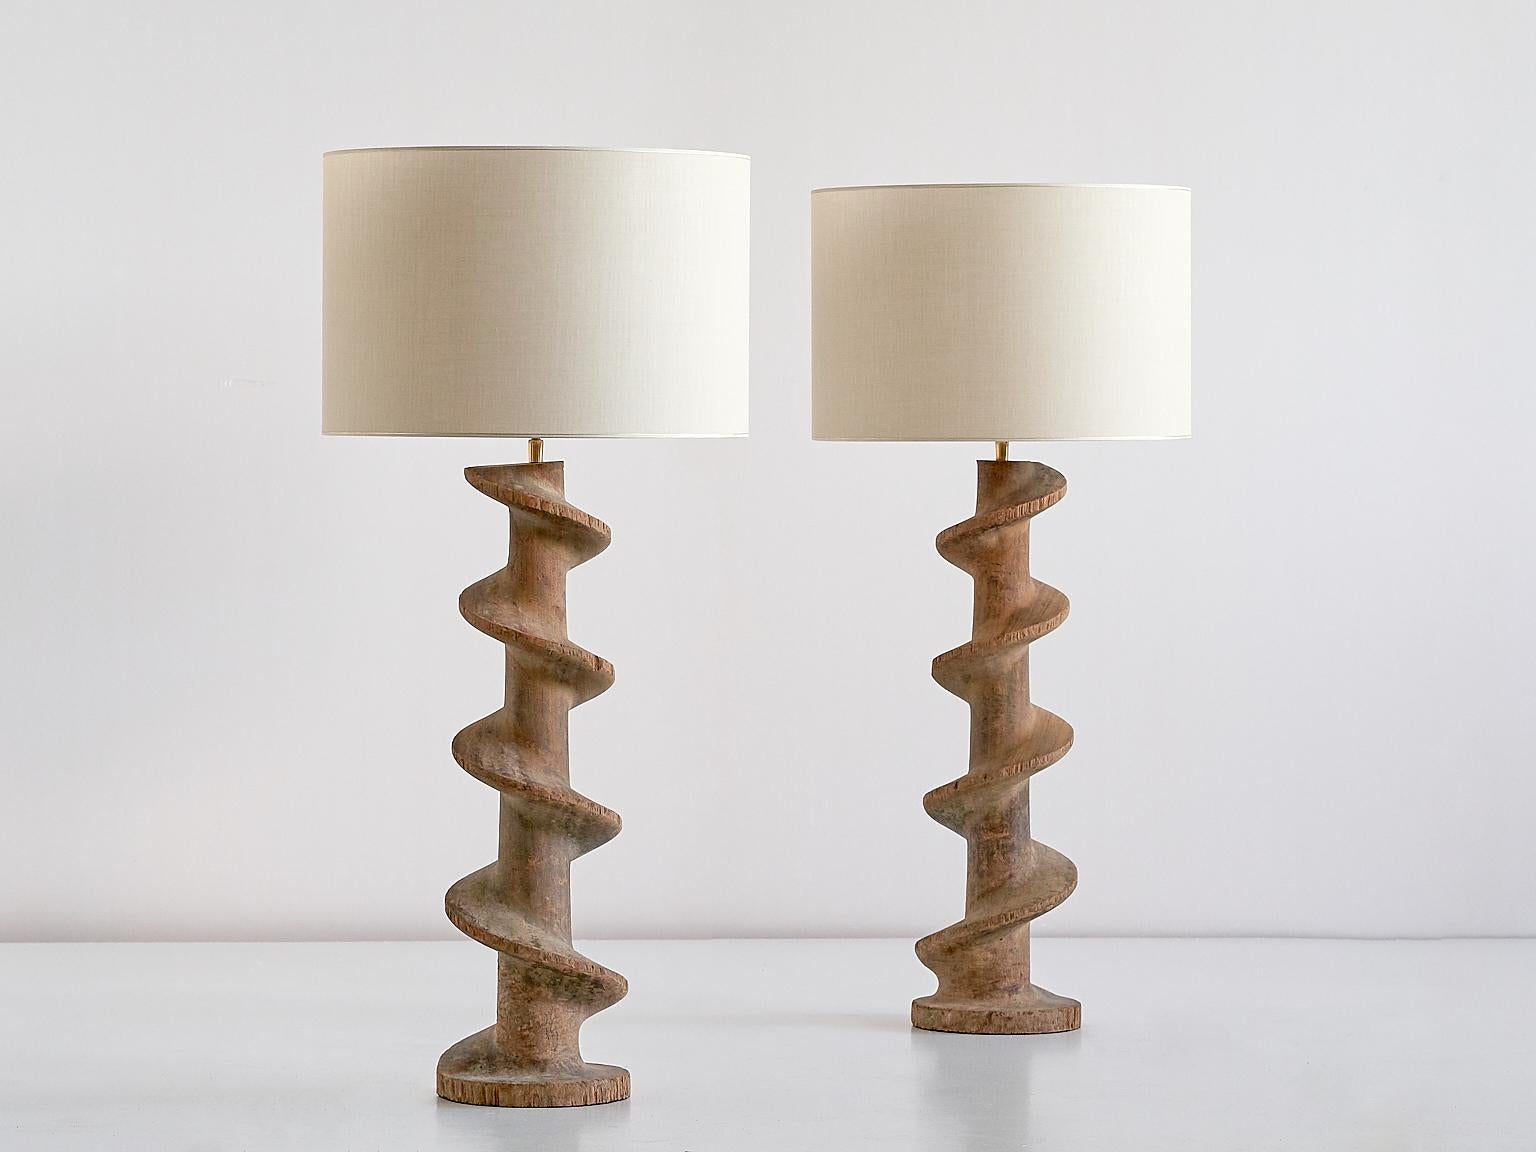 A unique pair of large table lamps consisting of a striking spiral screw base and custom fabric shades. 

The substantial concentric hardwood spirals were used in the textile industry in the southern part of Belgium in the late 19th century. The